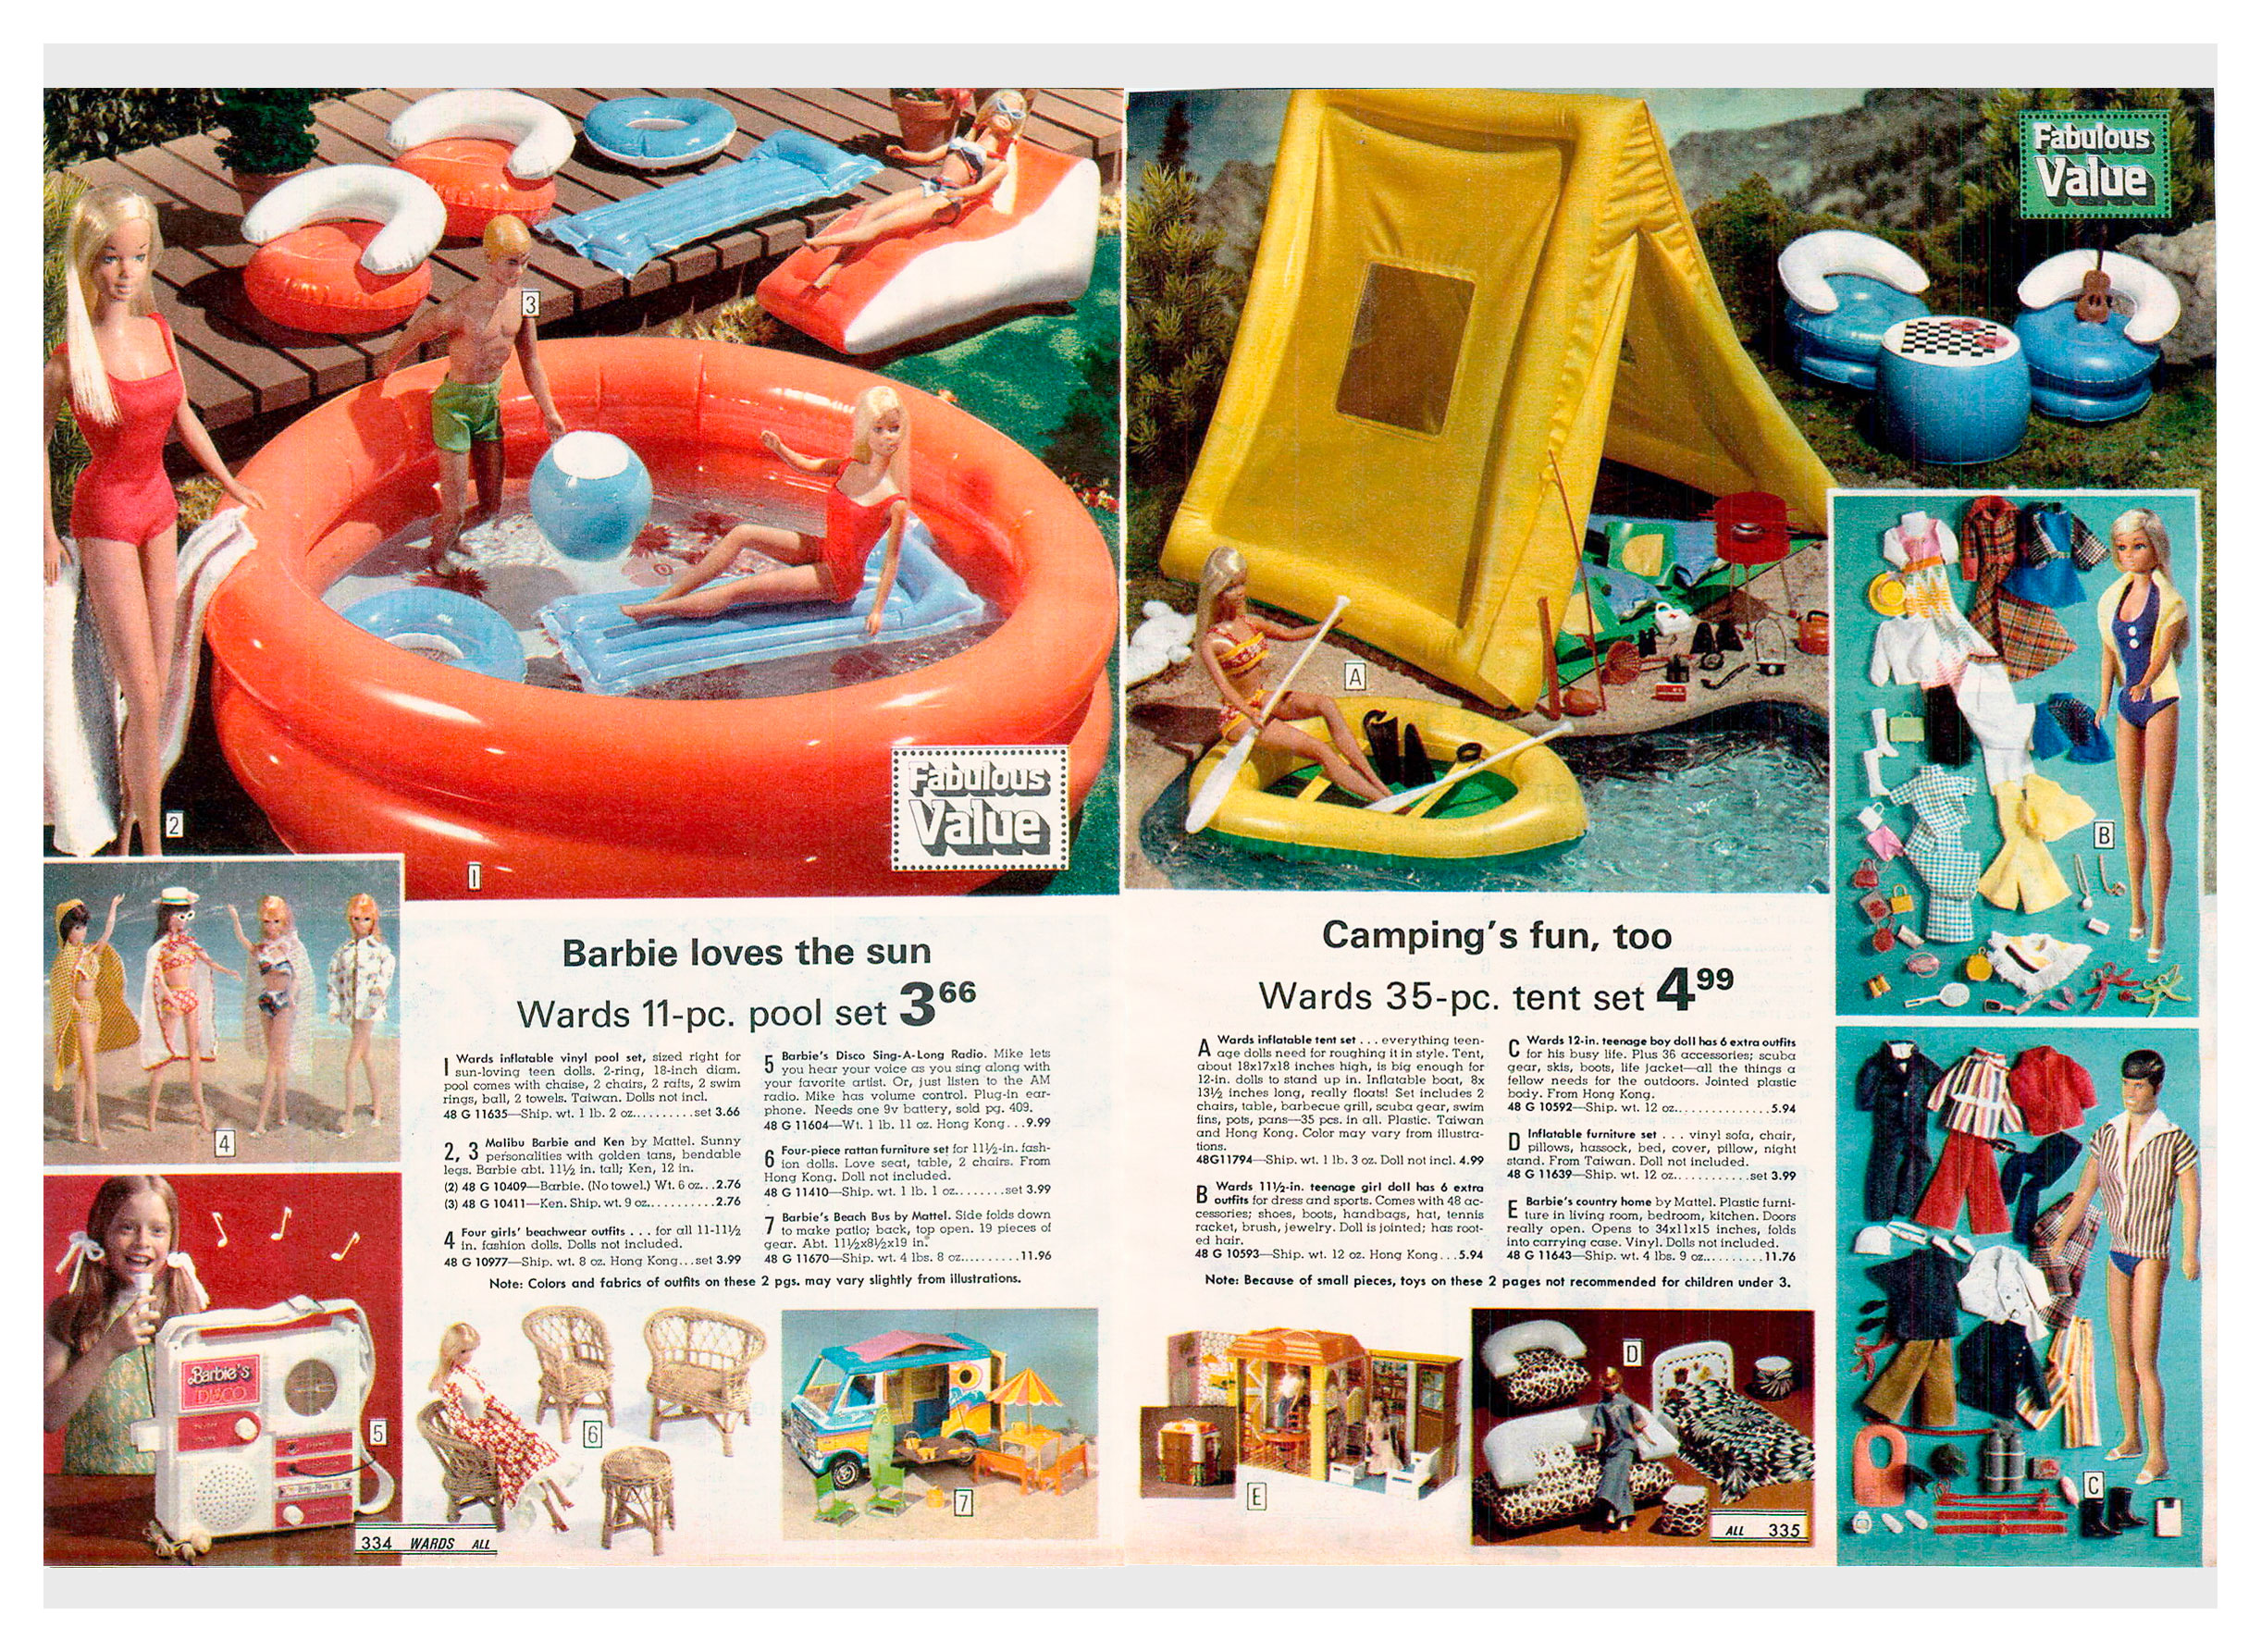 From 1976 Montgomery Ward Christmas catalogue